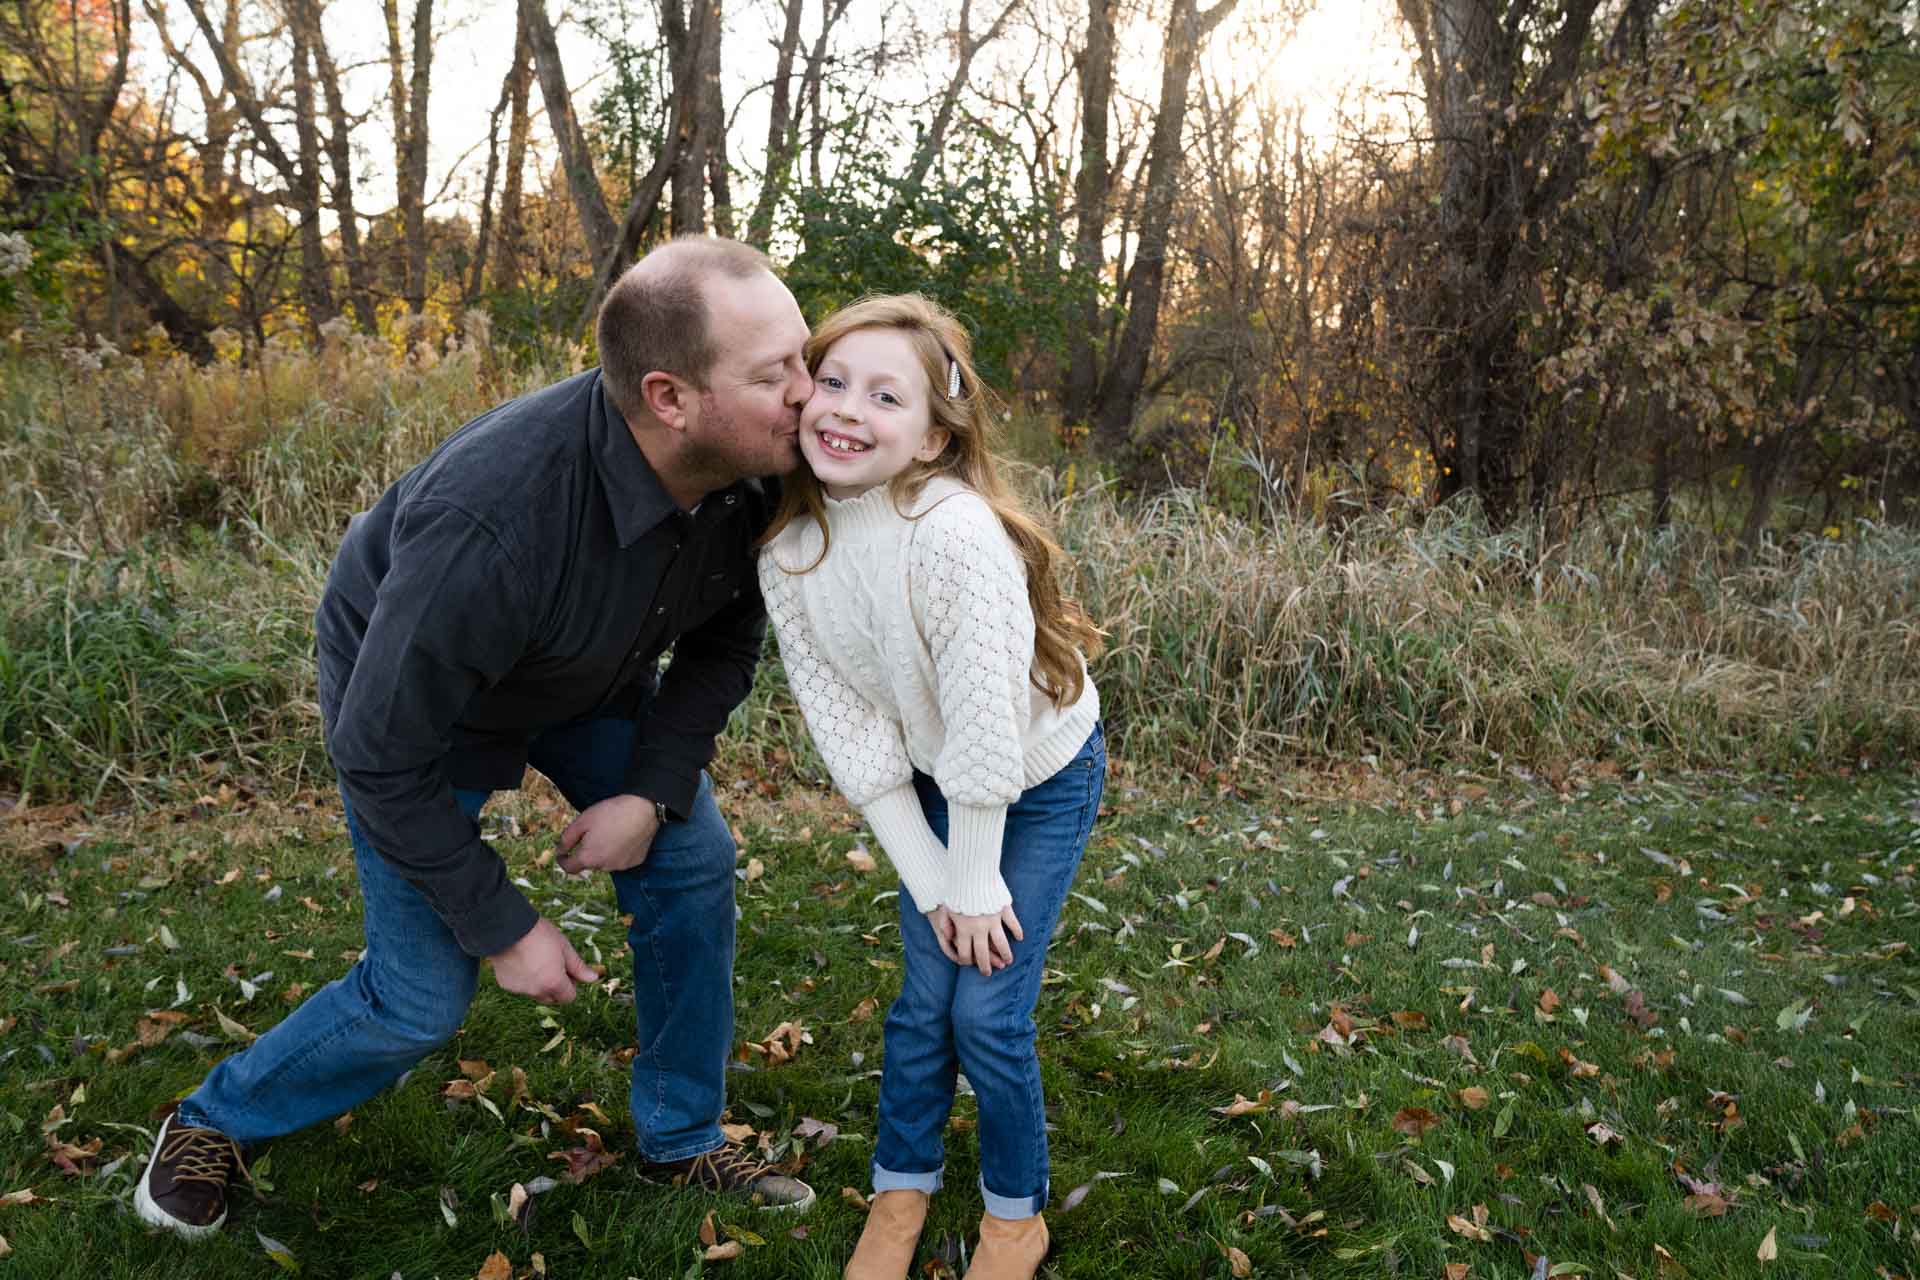 dad and daughter wearing jeans and sweaters during a fall photo shoot. dad giving daughter a kiss on the cheek